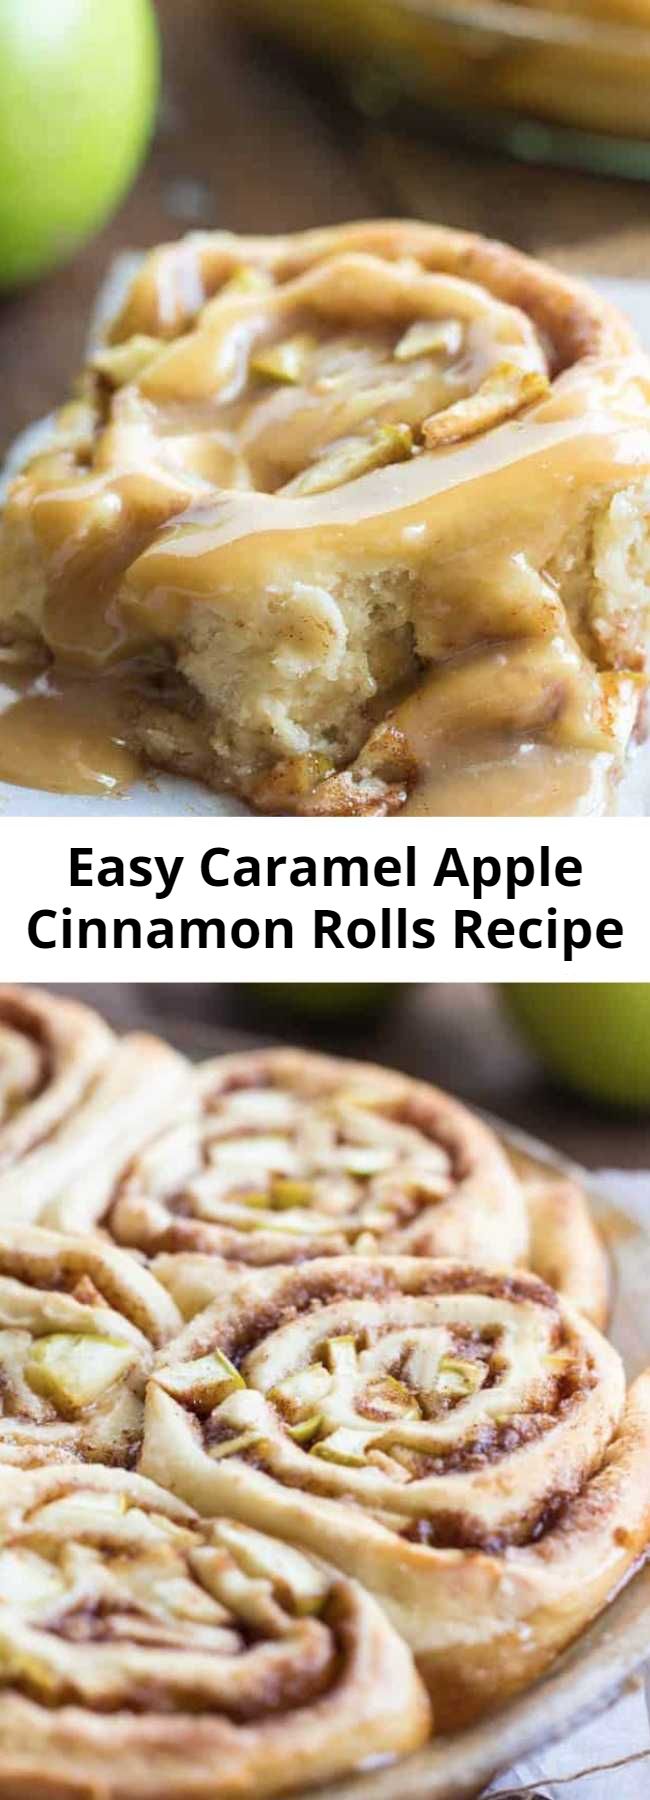 Easy Caramel Apple Cinnamon Rolls Recipe - Caramel Apple Cinnamon Rolls are a quick and easy cinnamon roll stuffed with real apples and drizzled with caramel. Ready within an hour!